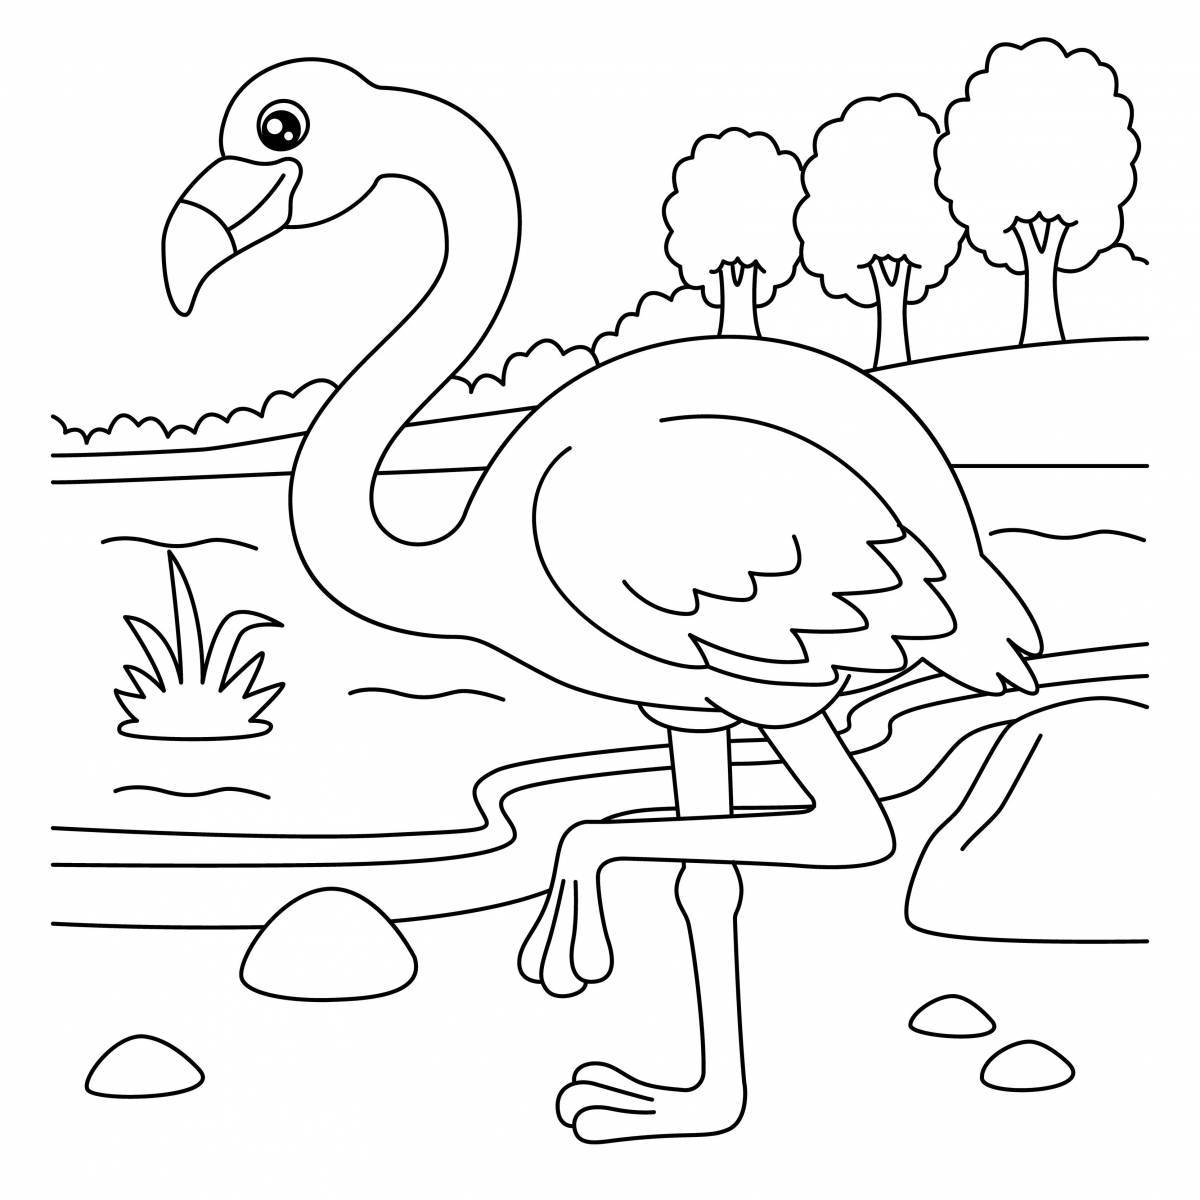 Flamingo coloring book for kids